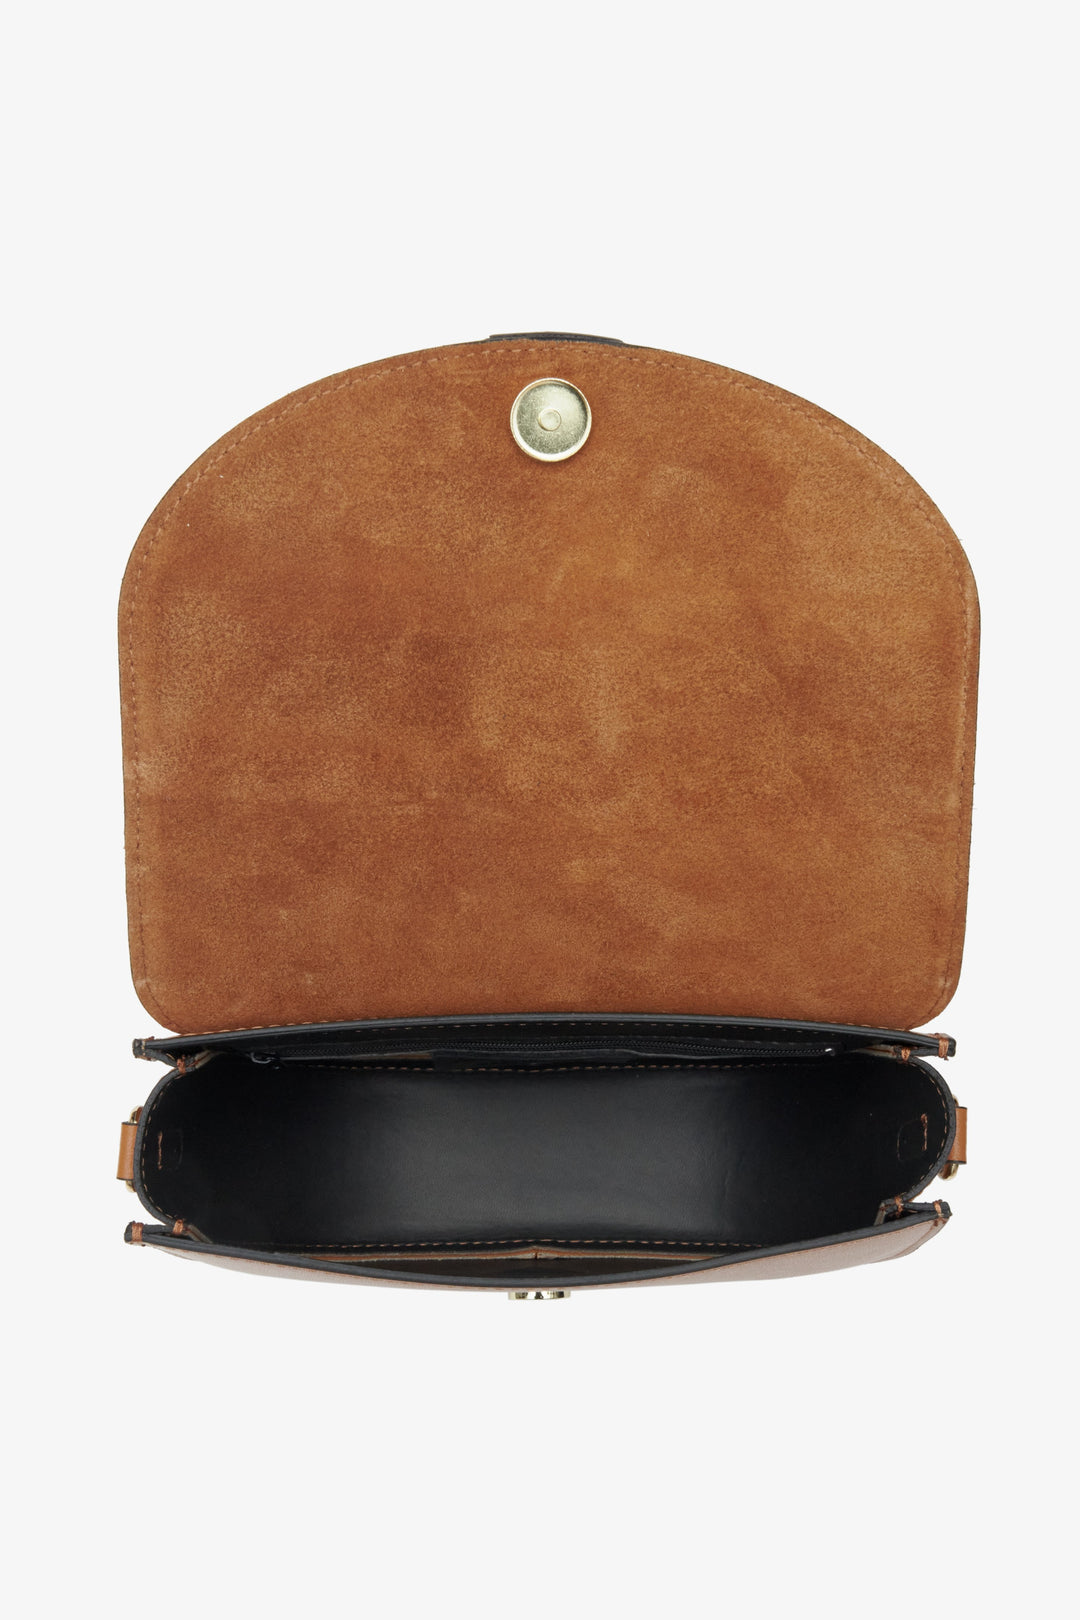 Estro women's brown handbag made from genuine leather in the shape of a horseshoe - close-up of the bag's interior.